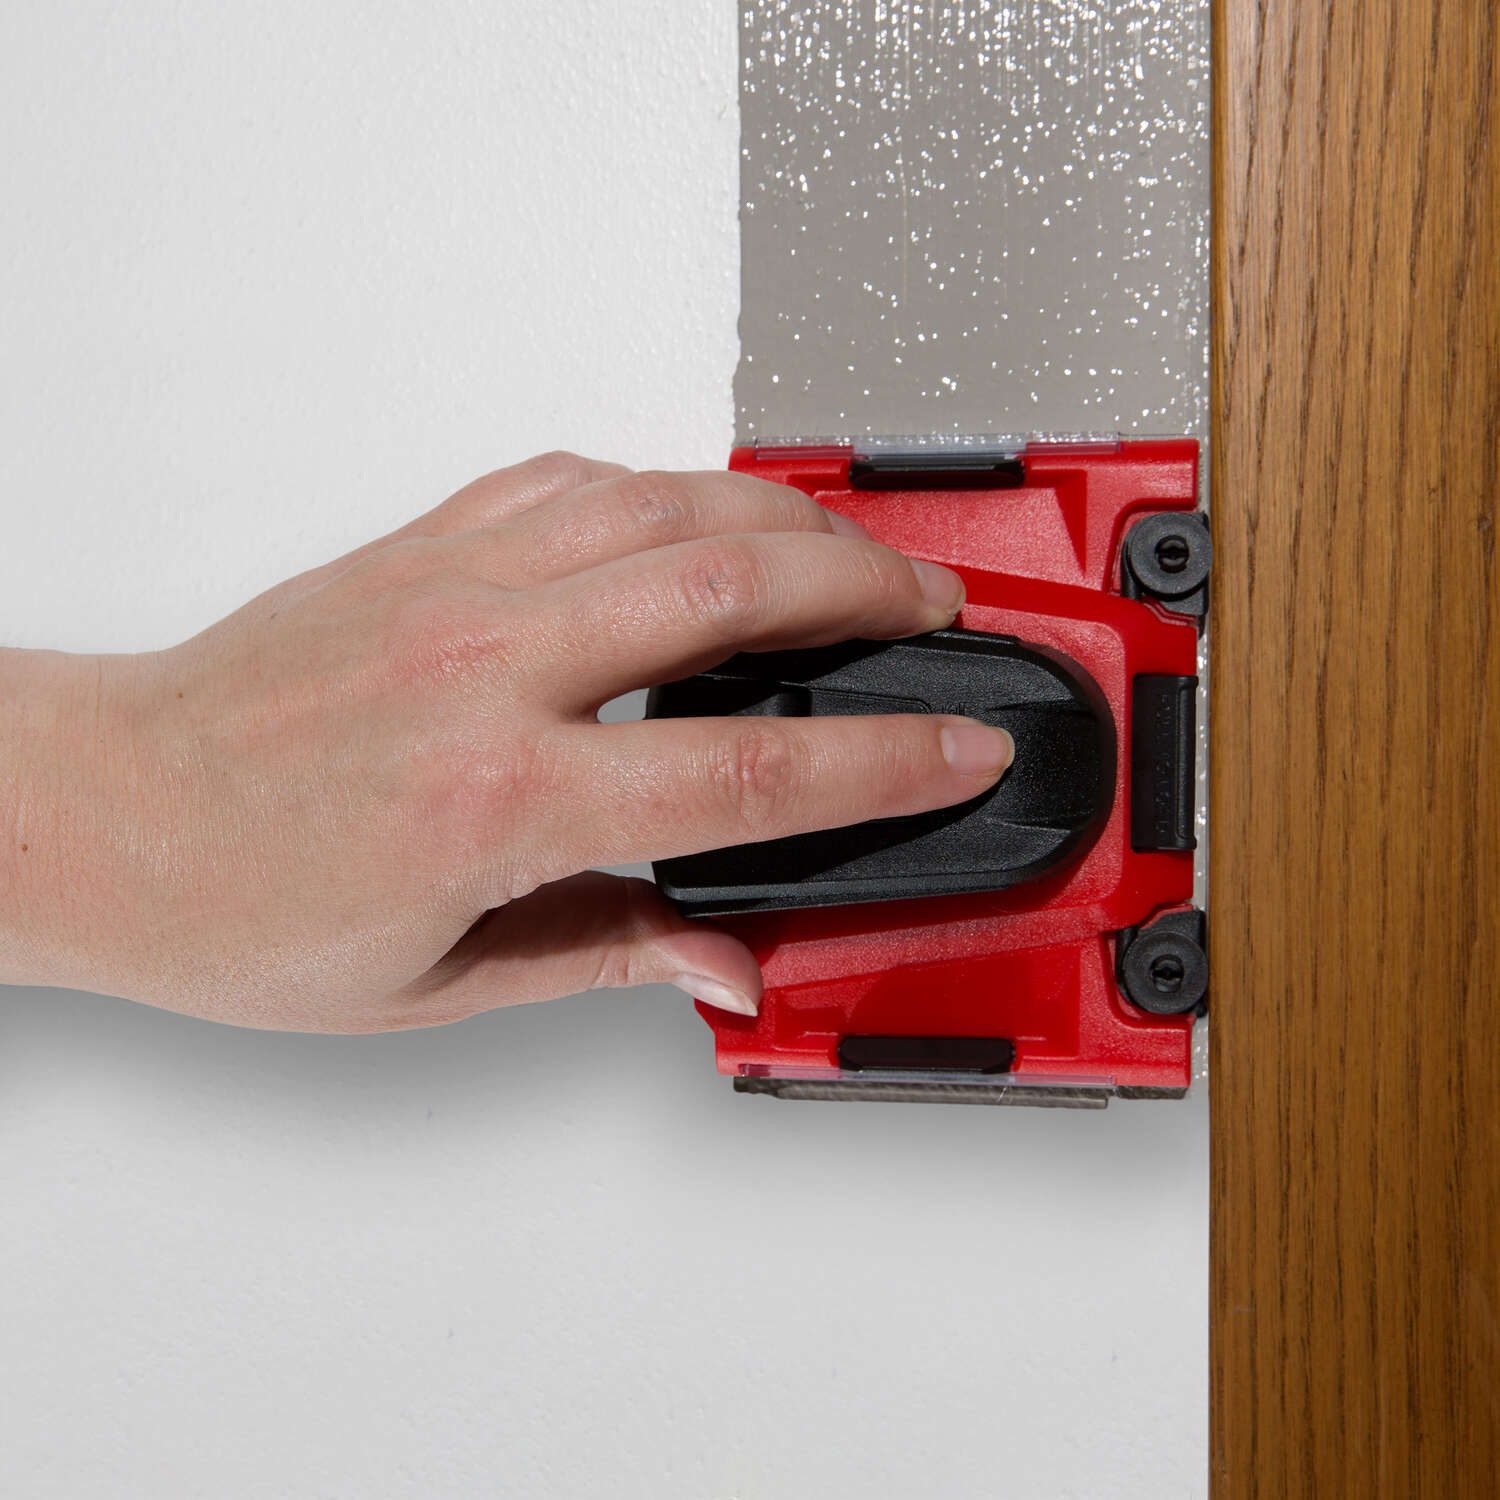 The 8 Best Paint Edging Tools for Painting Trim